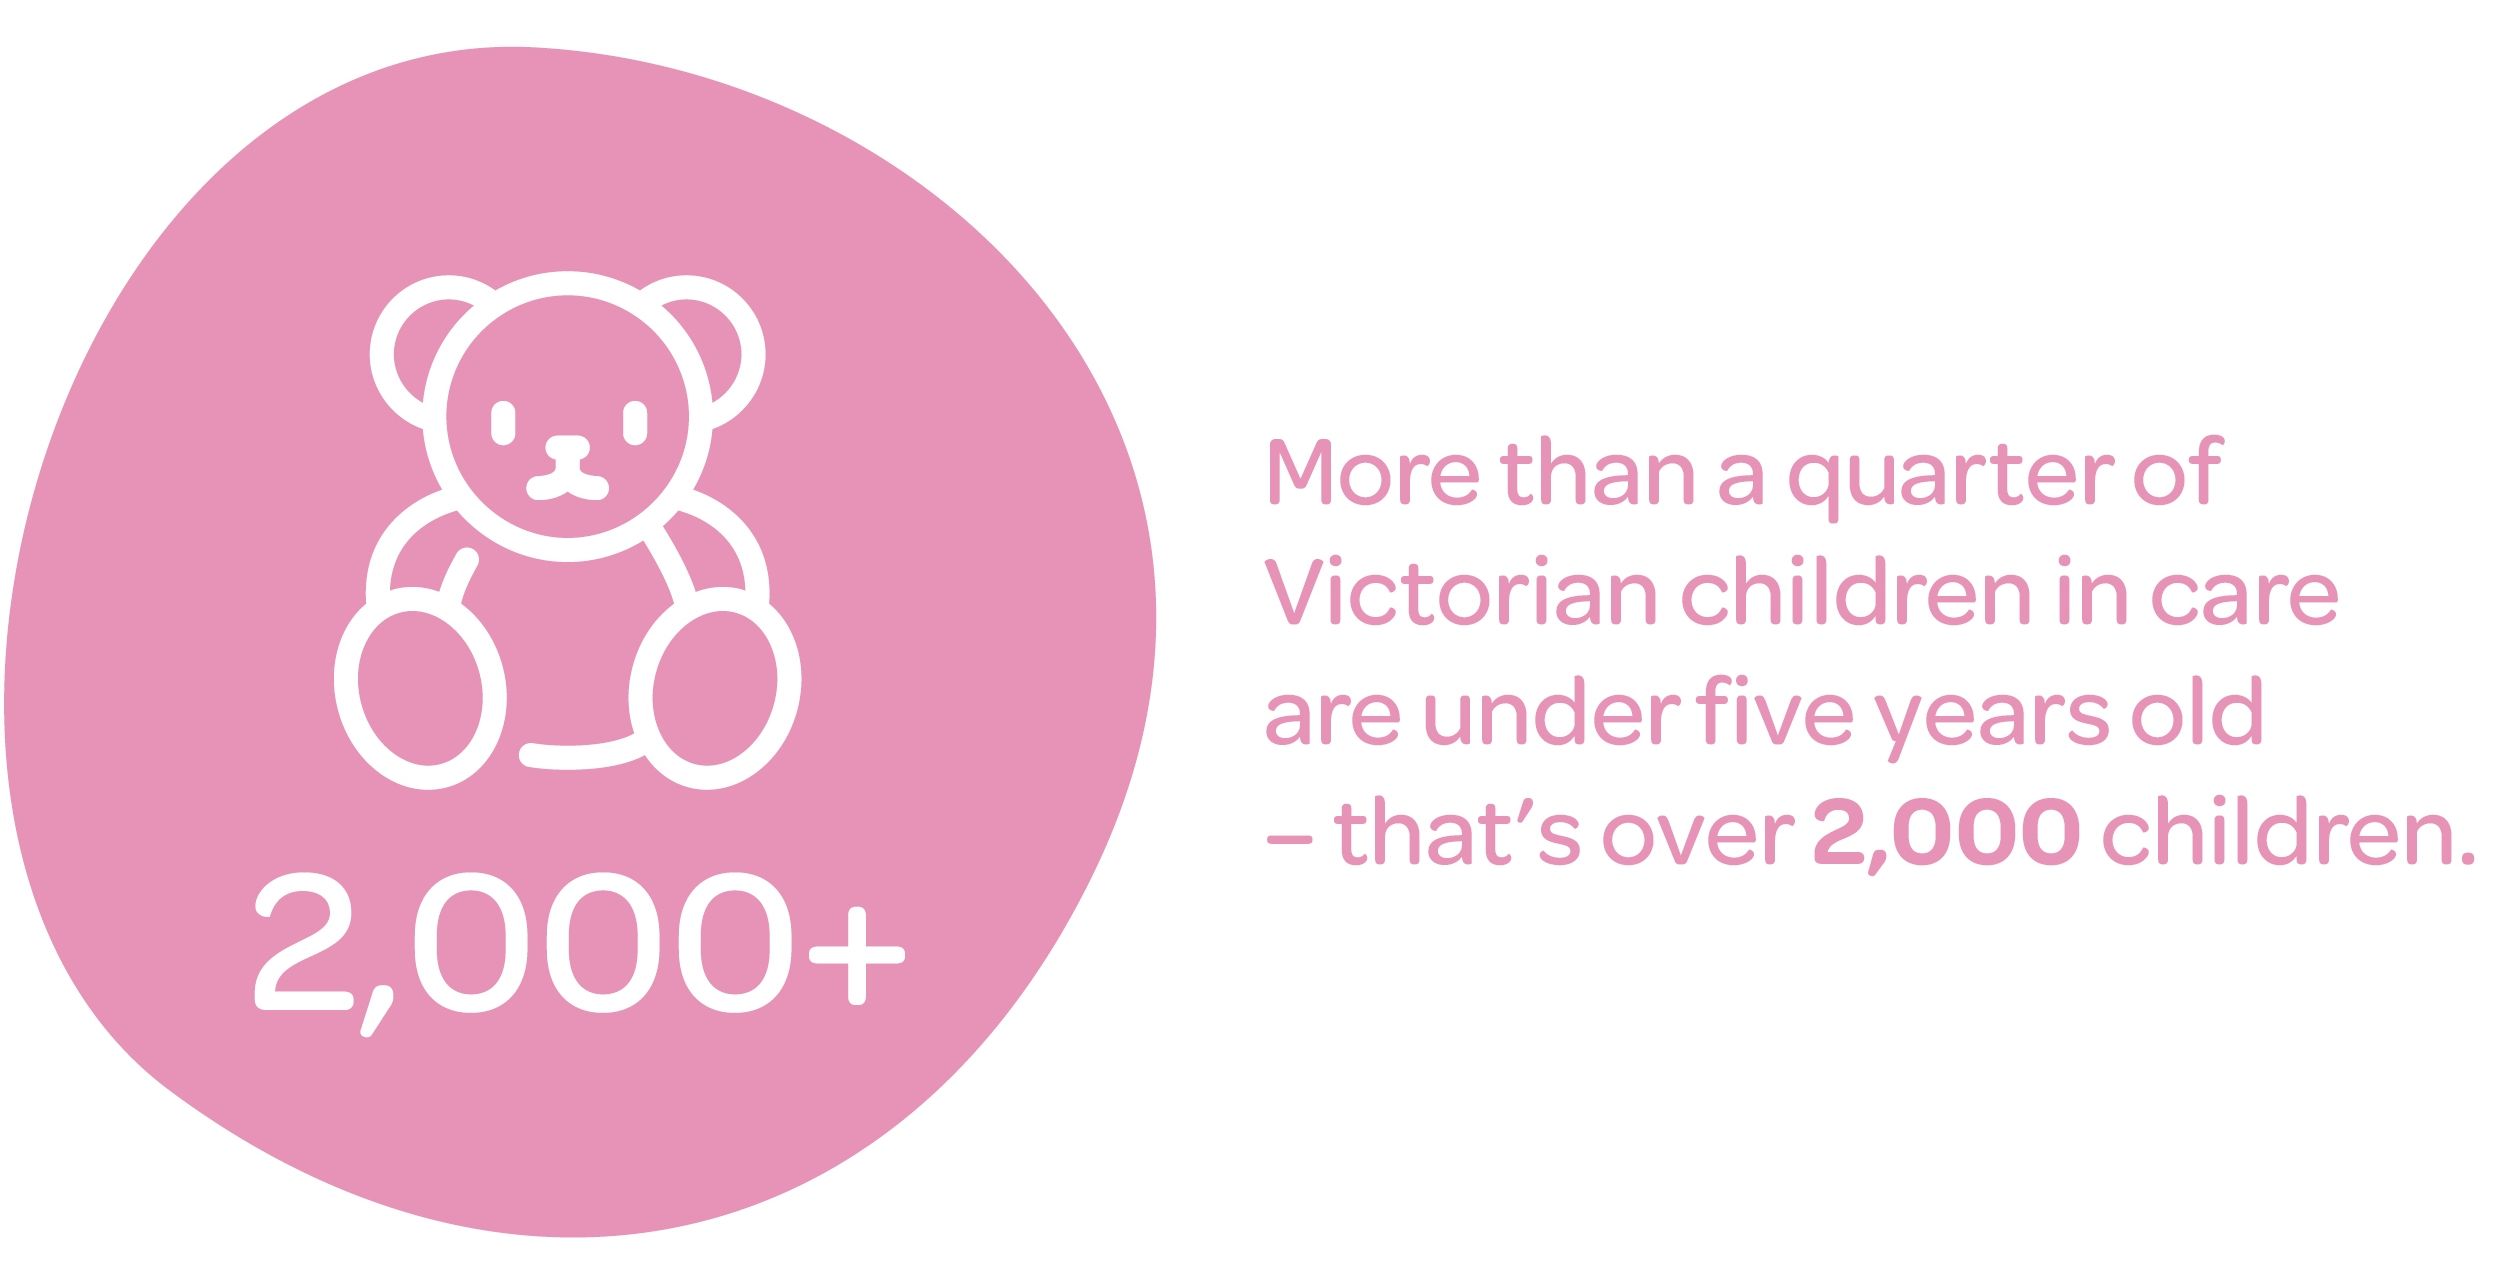 more than a quarter of victorian children in care are under five years old that's over two thousand children